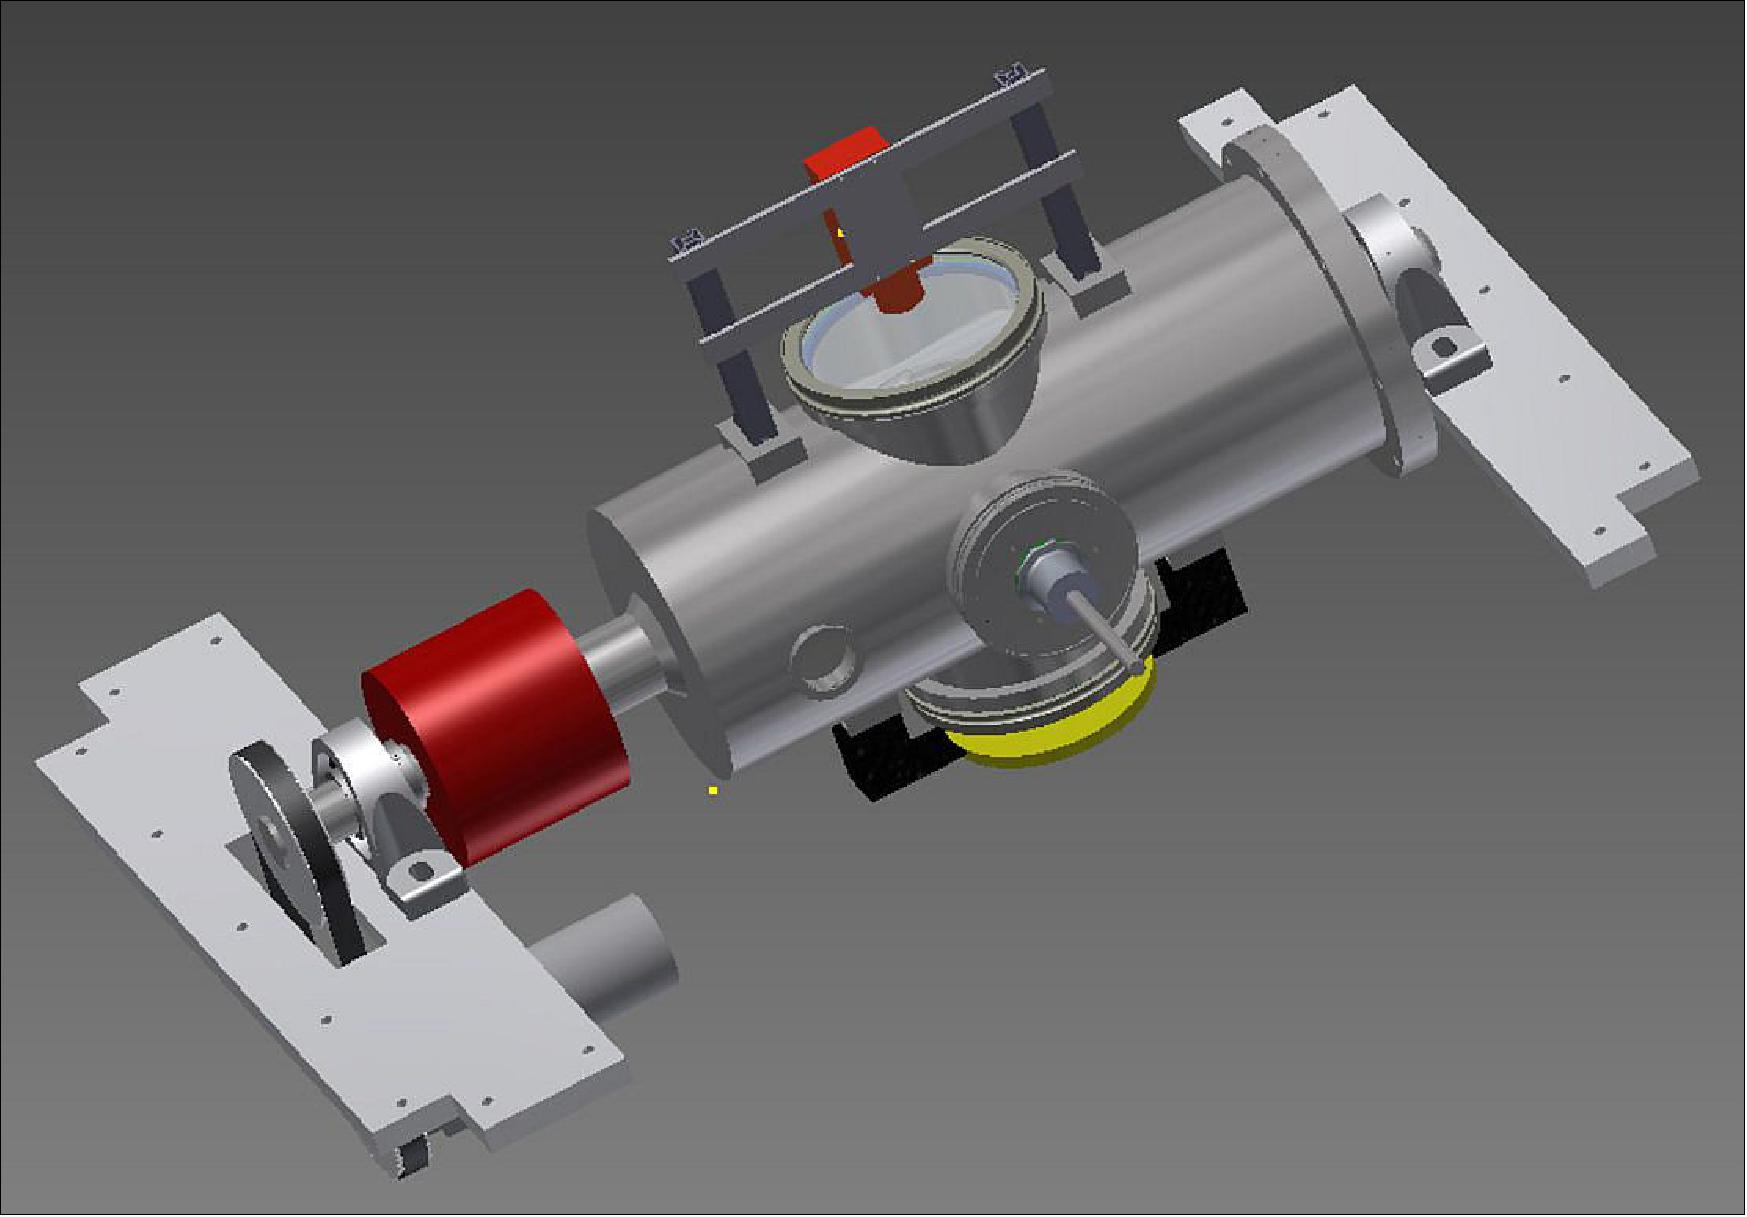 Figure 33: CAD - model of the vacuum chamber used to simulate Martian atmosphere. The chamber is rotated to create different g-levels (image credit: Anemoi4 Team)